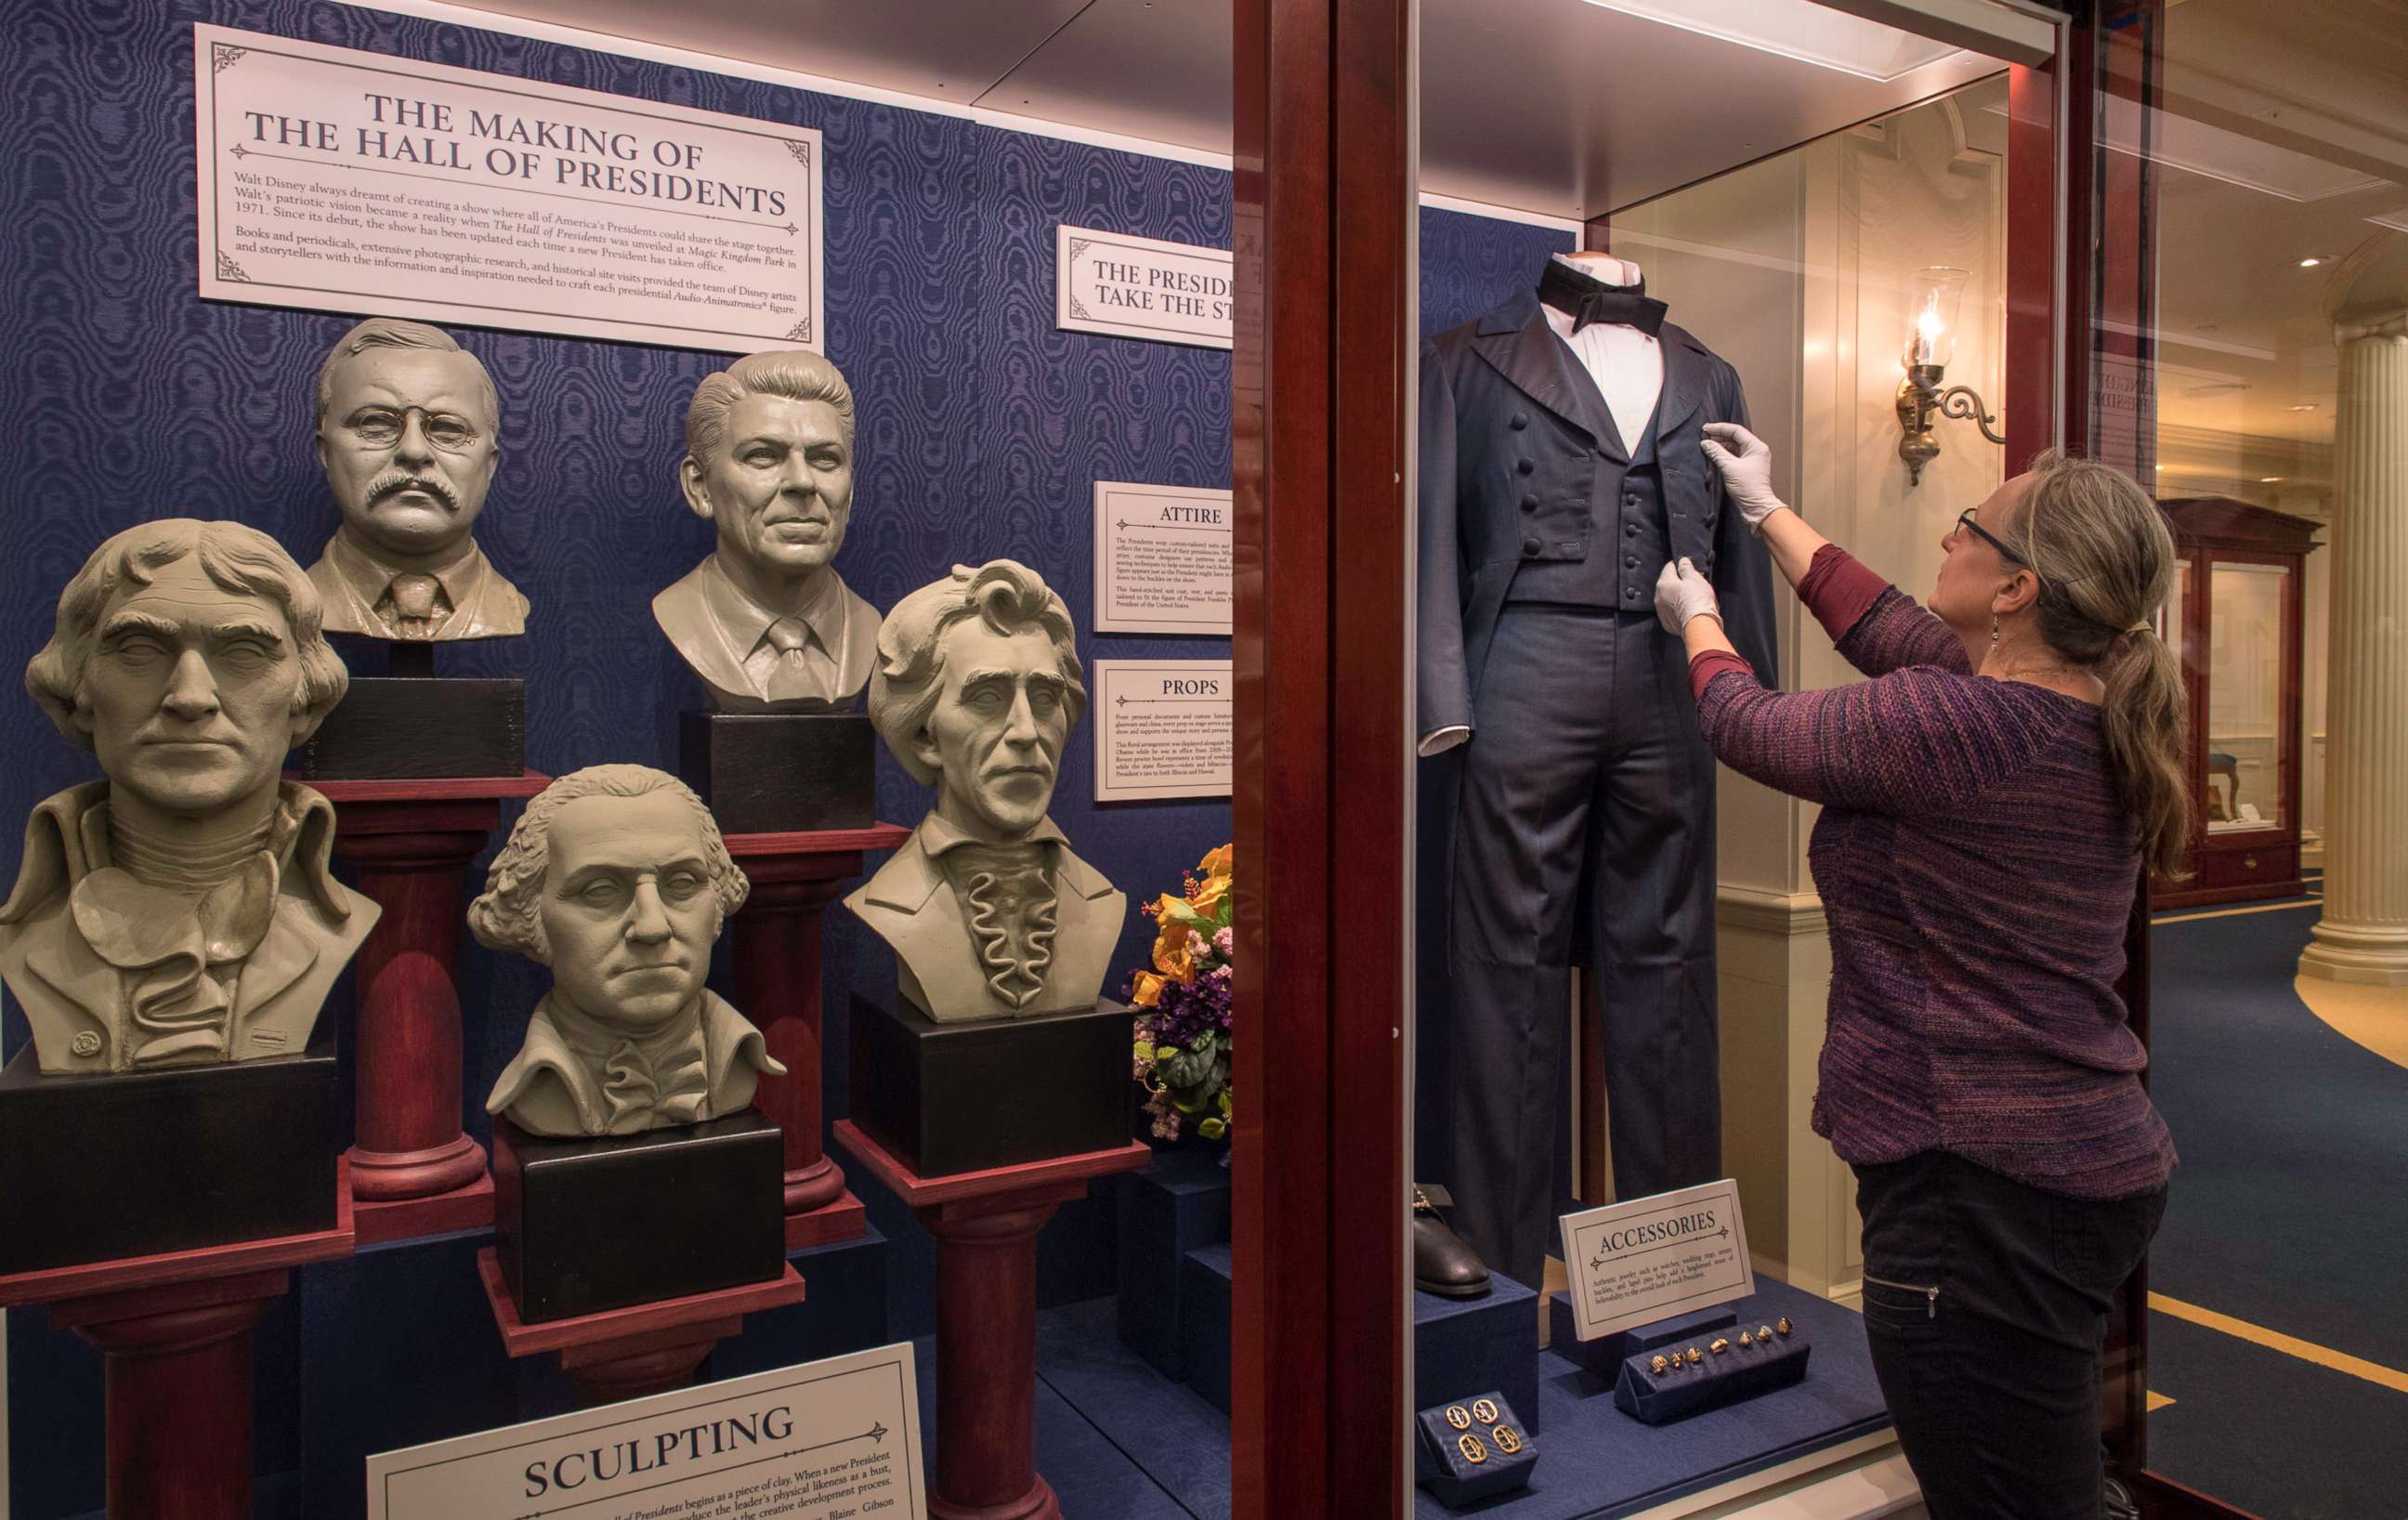 PHOTO: A display featured in Walt Disney Parks & Resorts' Hall of Presidents exhibit at Magic Kingdom Park in Orlando.